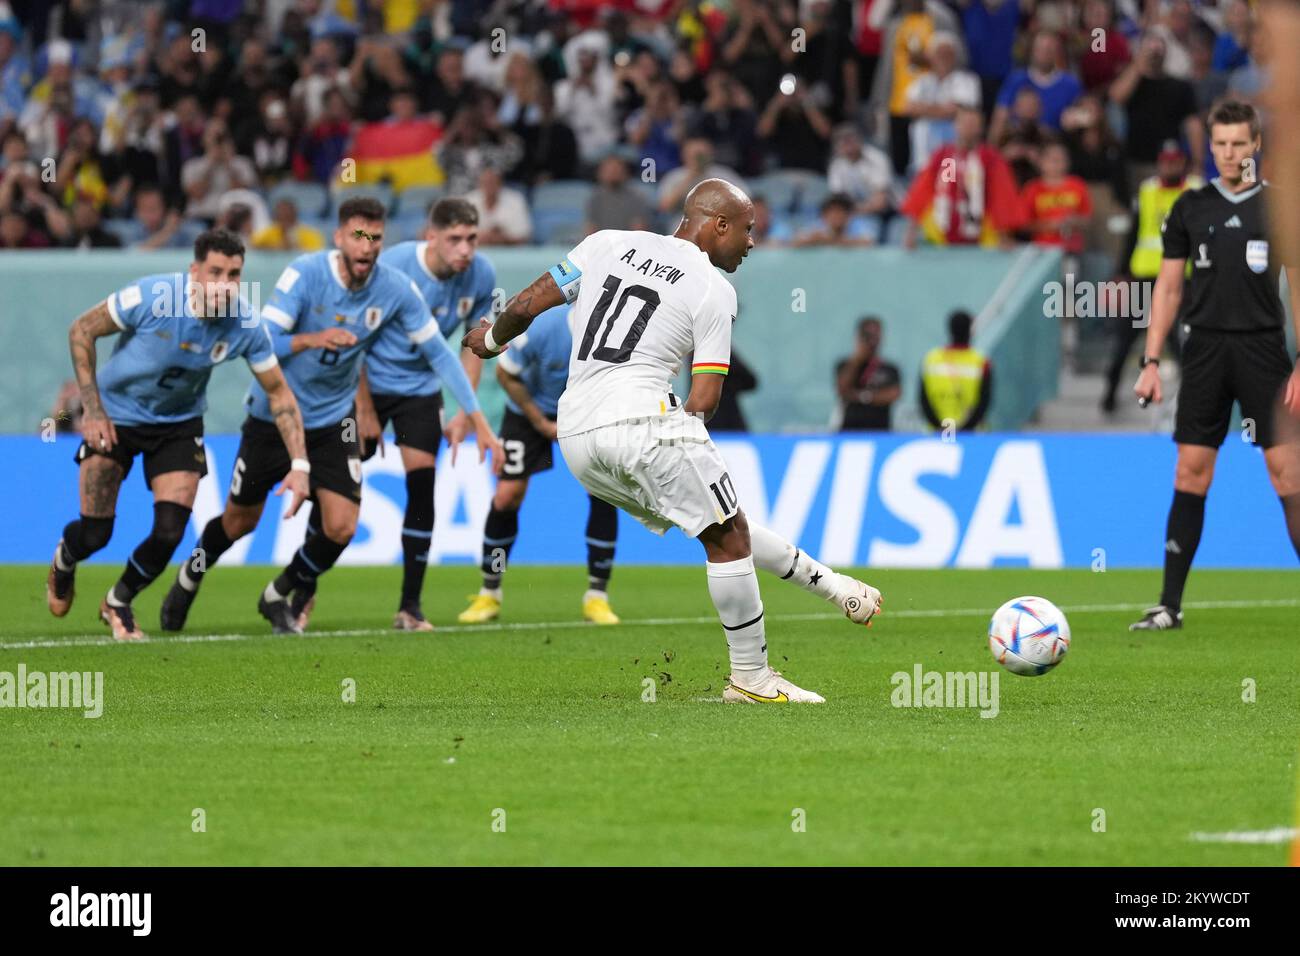 Al Wakrah, Qatar. 2nd Dec, 2022. Andre Ayew of Ghana shoots a penalty kick which is saved by Uruguay's goalkeeper Sergio Rochet during the Group H match between Ghana and Uruguay at the 2022 FIFA World Cup at Al Janoub Stadium in Al Wakrah, Qatar, Dec. 2, 2022. Credit: Zheng Huansong/Xinhua/Alamy Live News Stock Photo